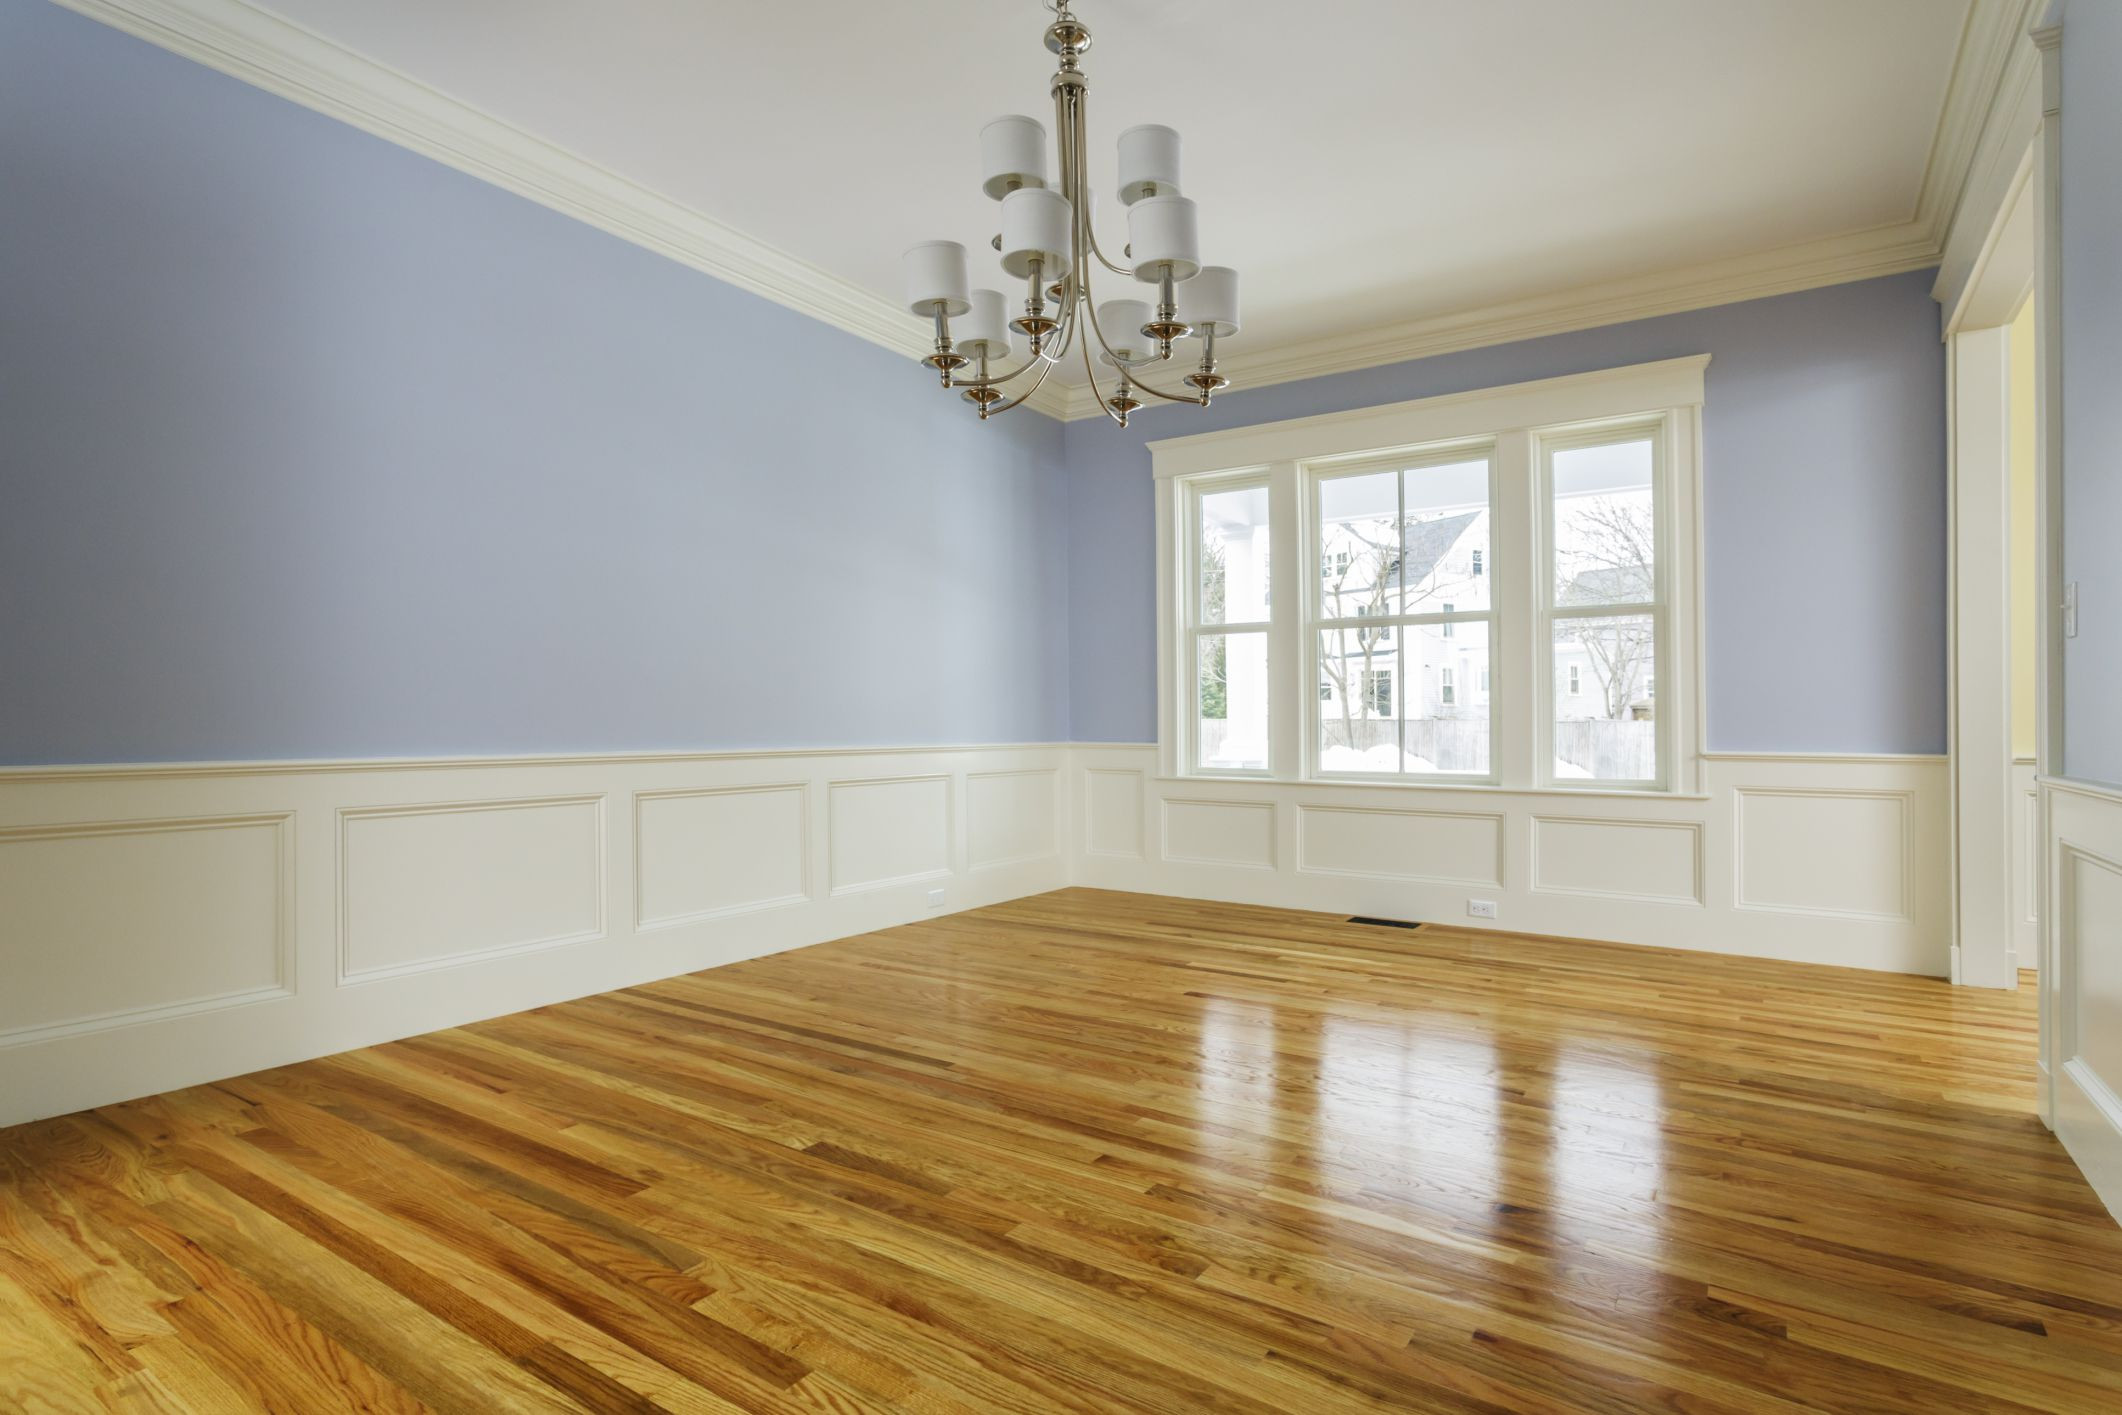 17 Unique Sanding and Restaining Hardwood Floors Cost 2024 free download sanding and restaining hardwood floors cost of the cost to refinish hardwood floors intended for 168686572 highres 56a2fd773df78cf7727b6cb3